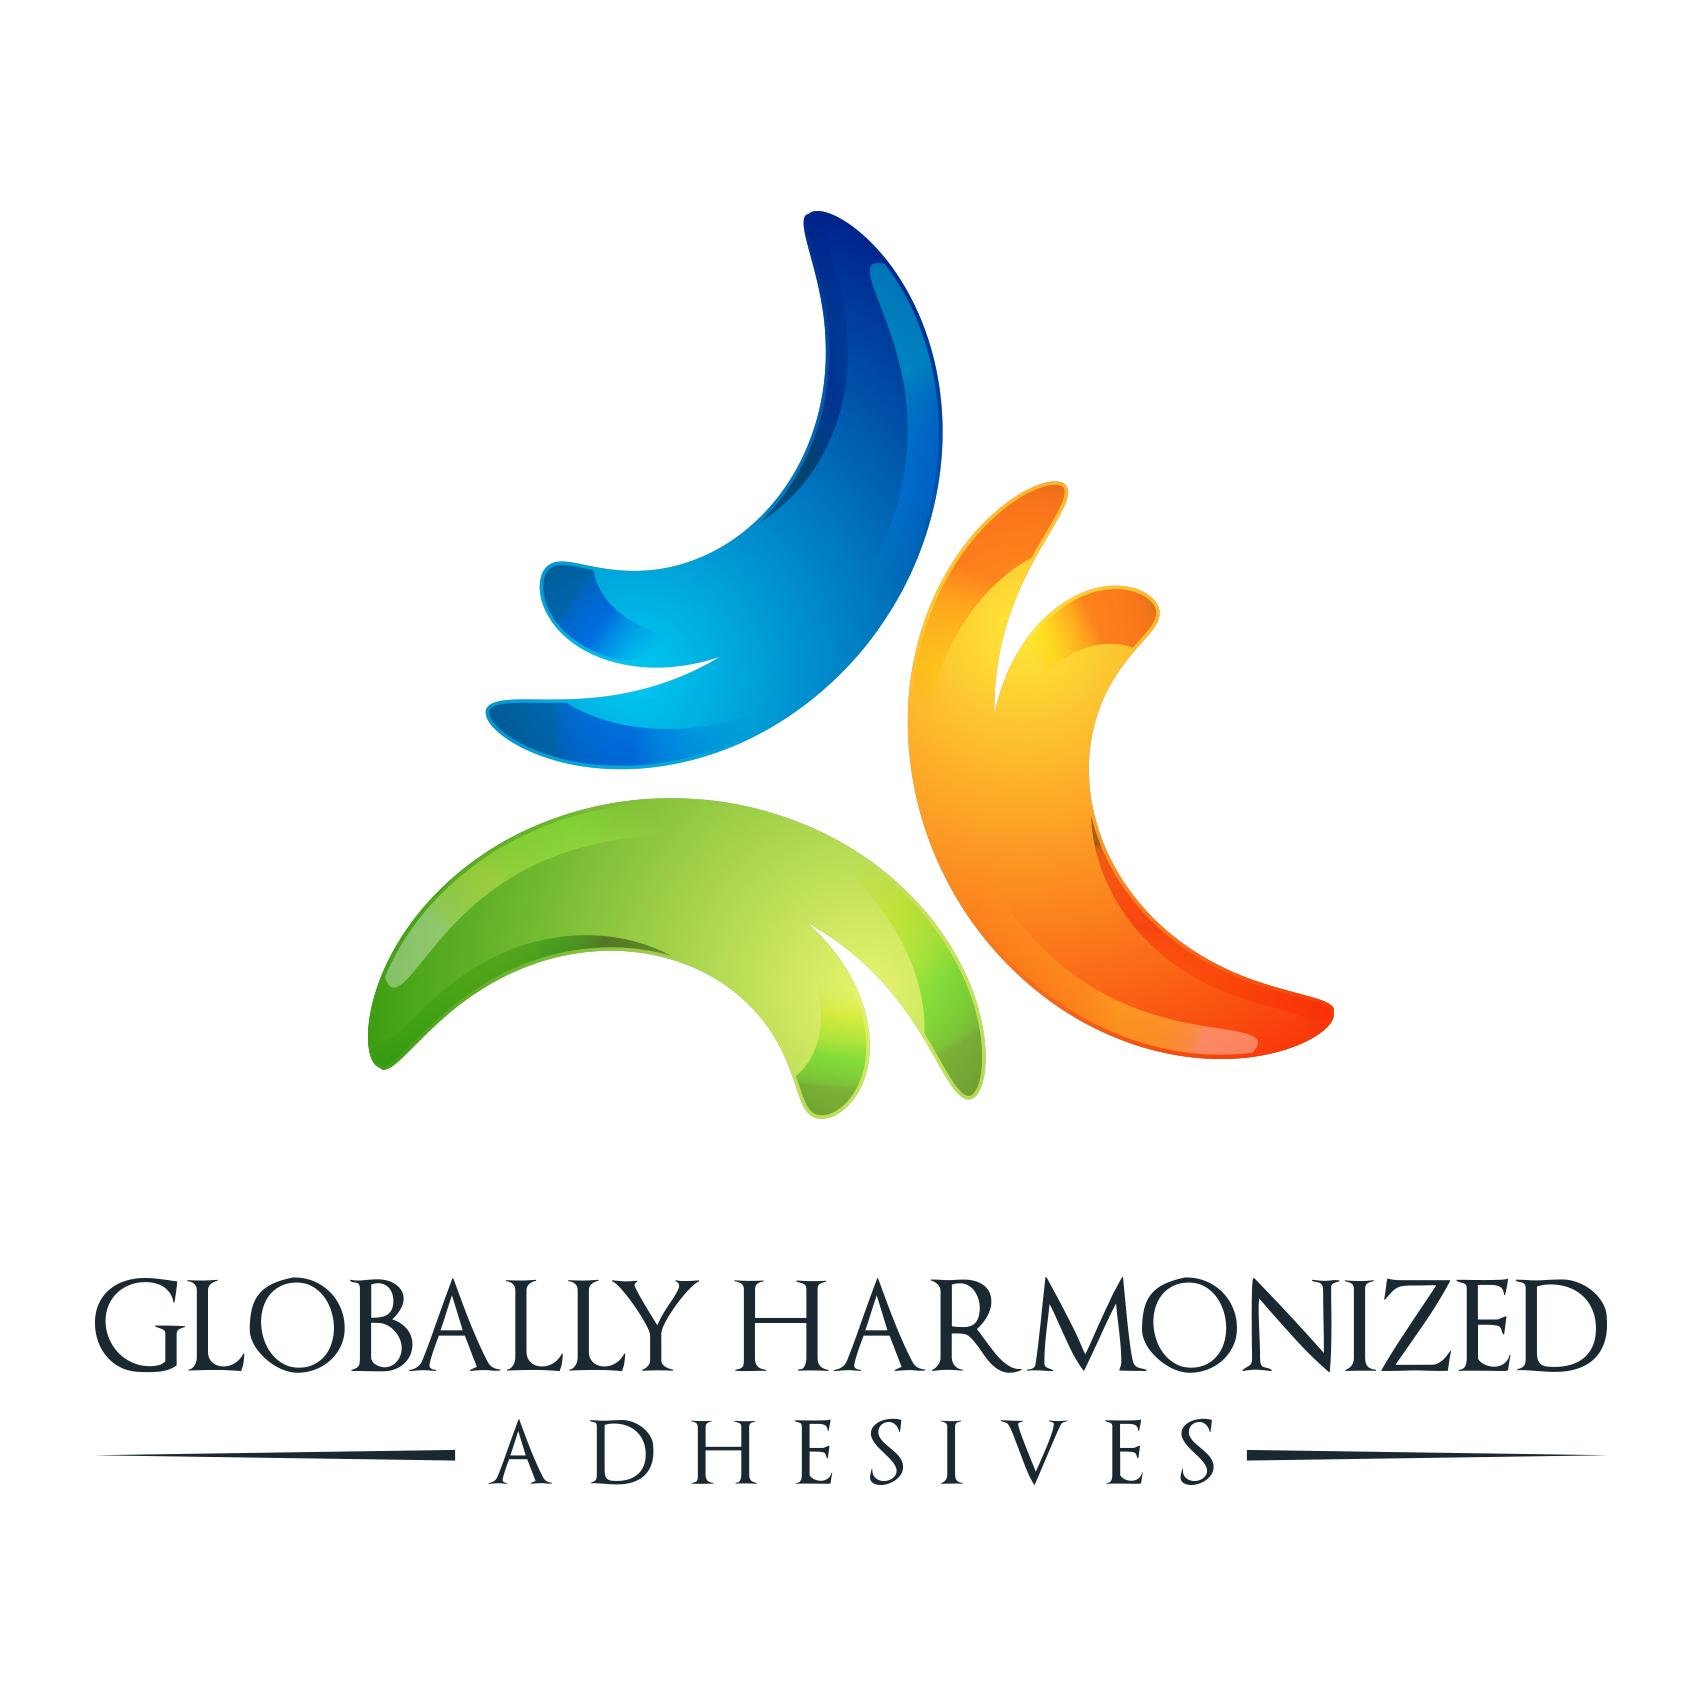 Globally Harmonized Adhesives LLC. Custom Chemical Solutions | Adhesives | Glues | Sealants | Potting Compounds | Expertly made in the USA.